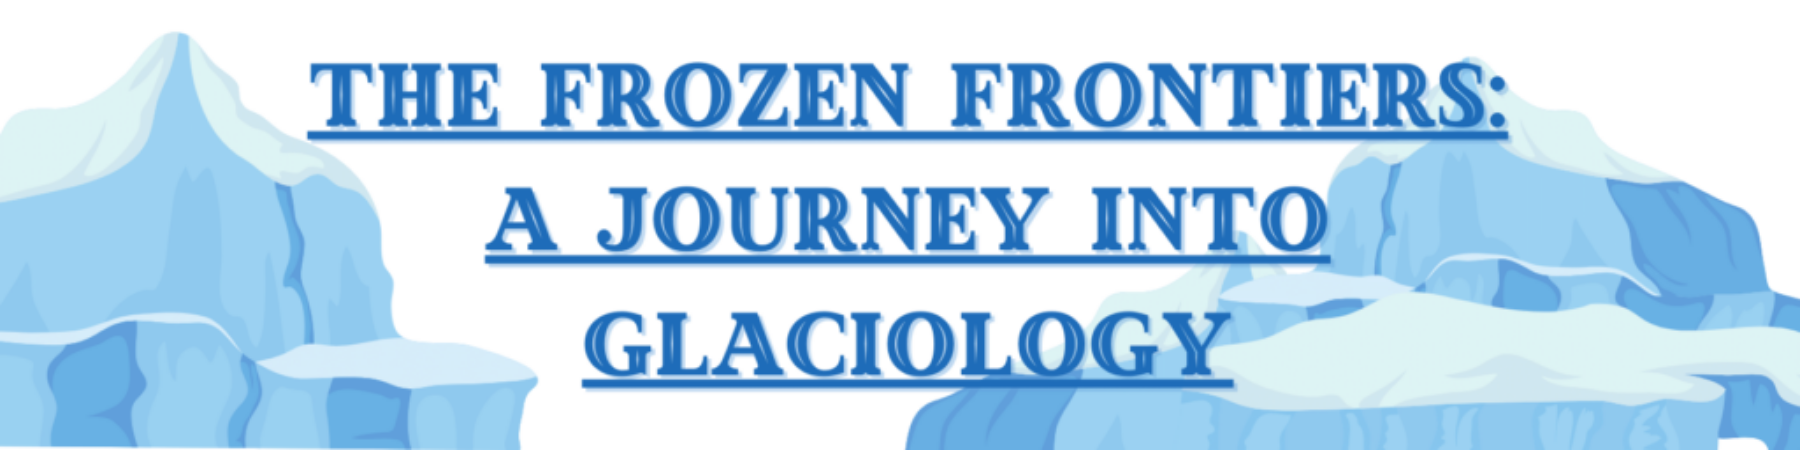 The Frozen Frontiers_ A Journey into Glaciology